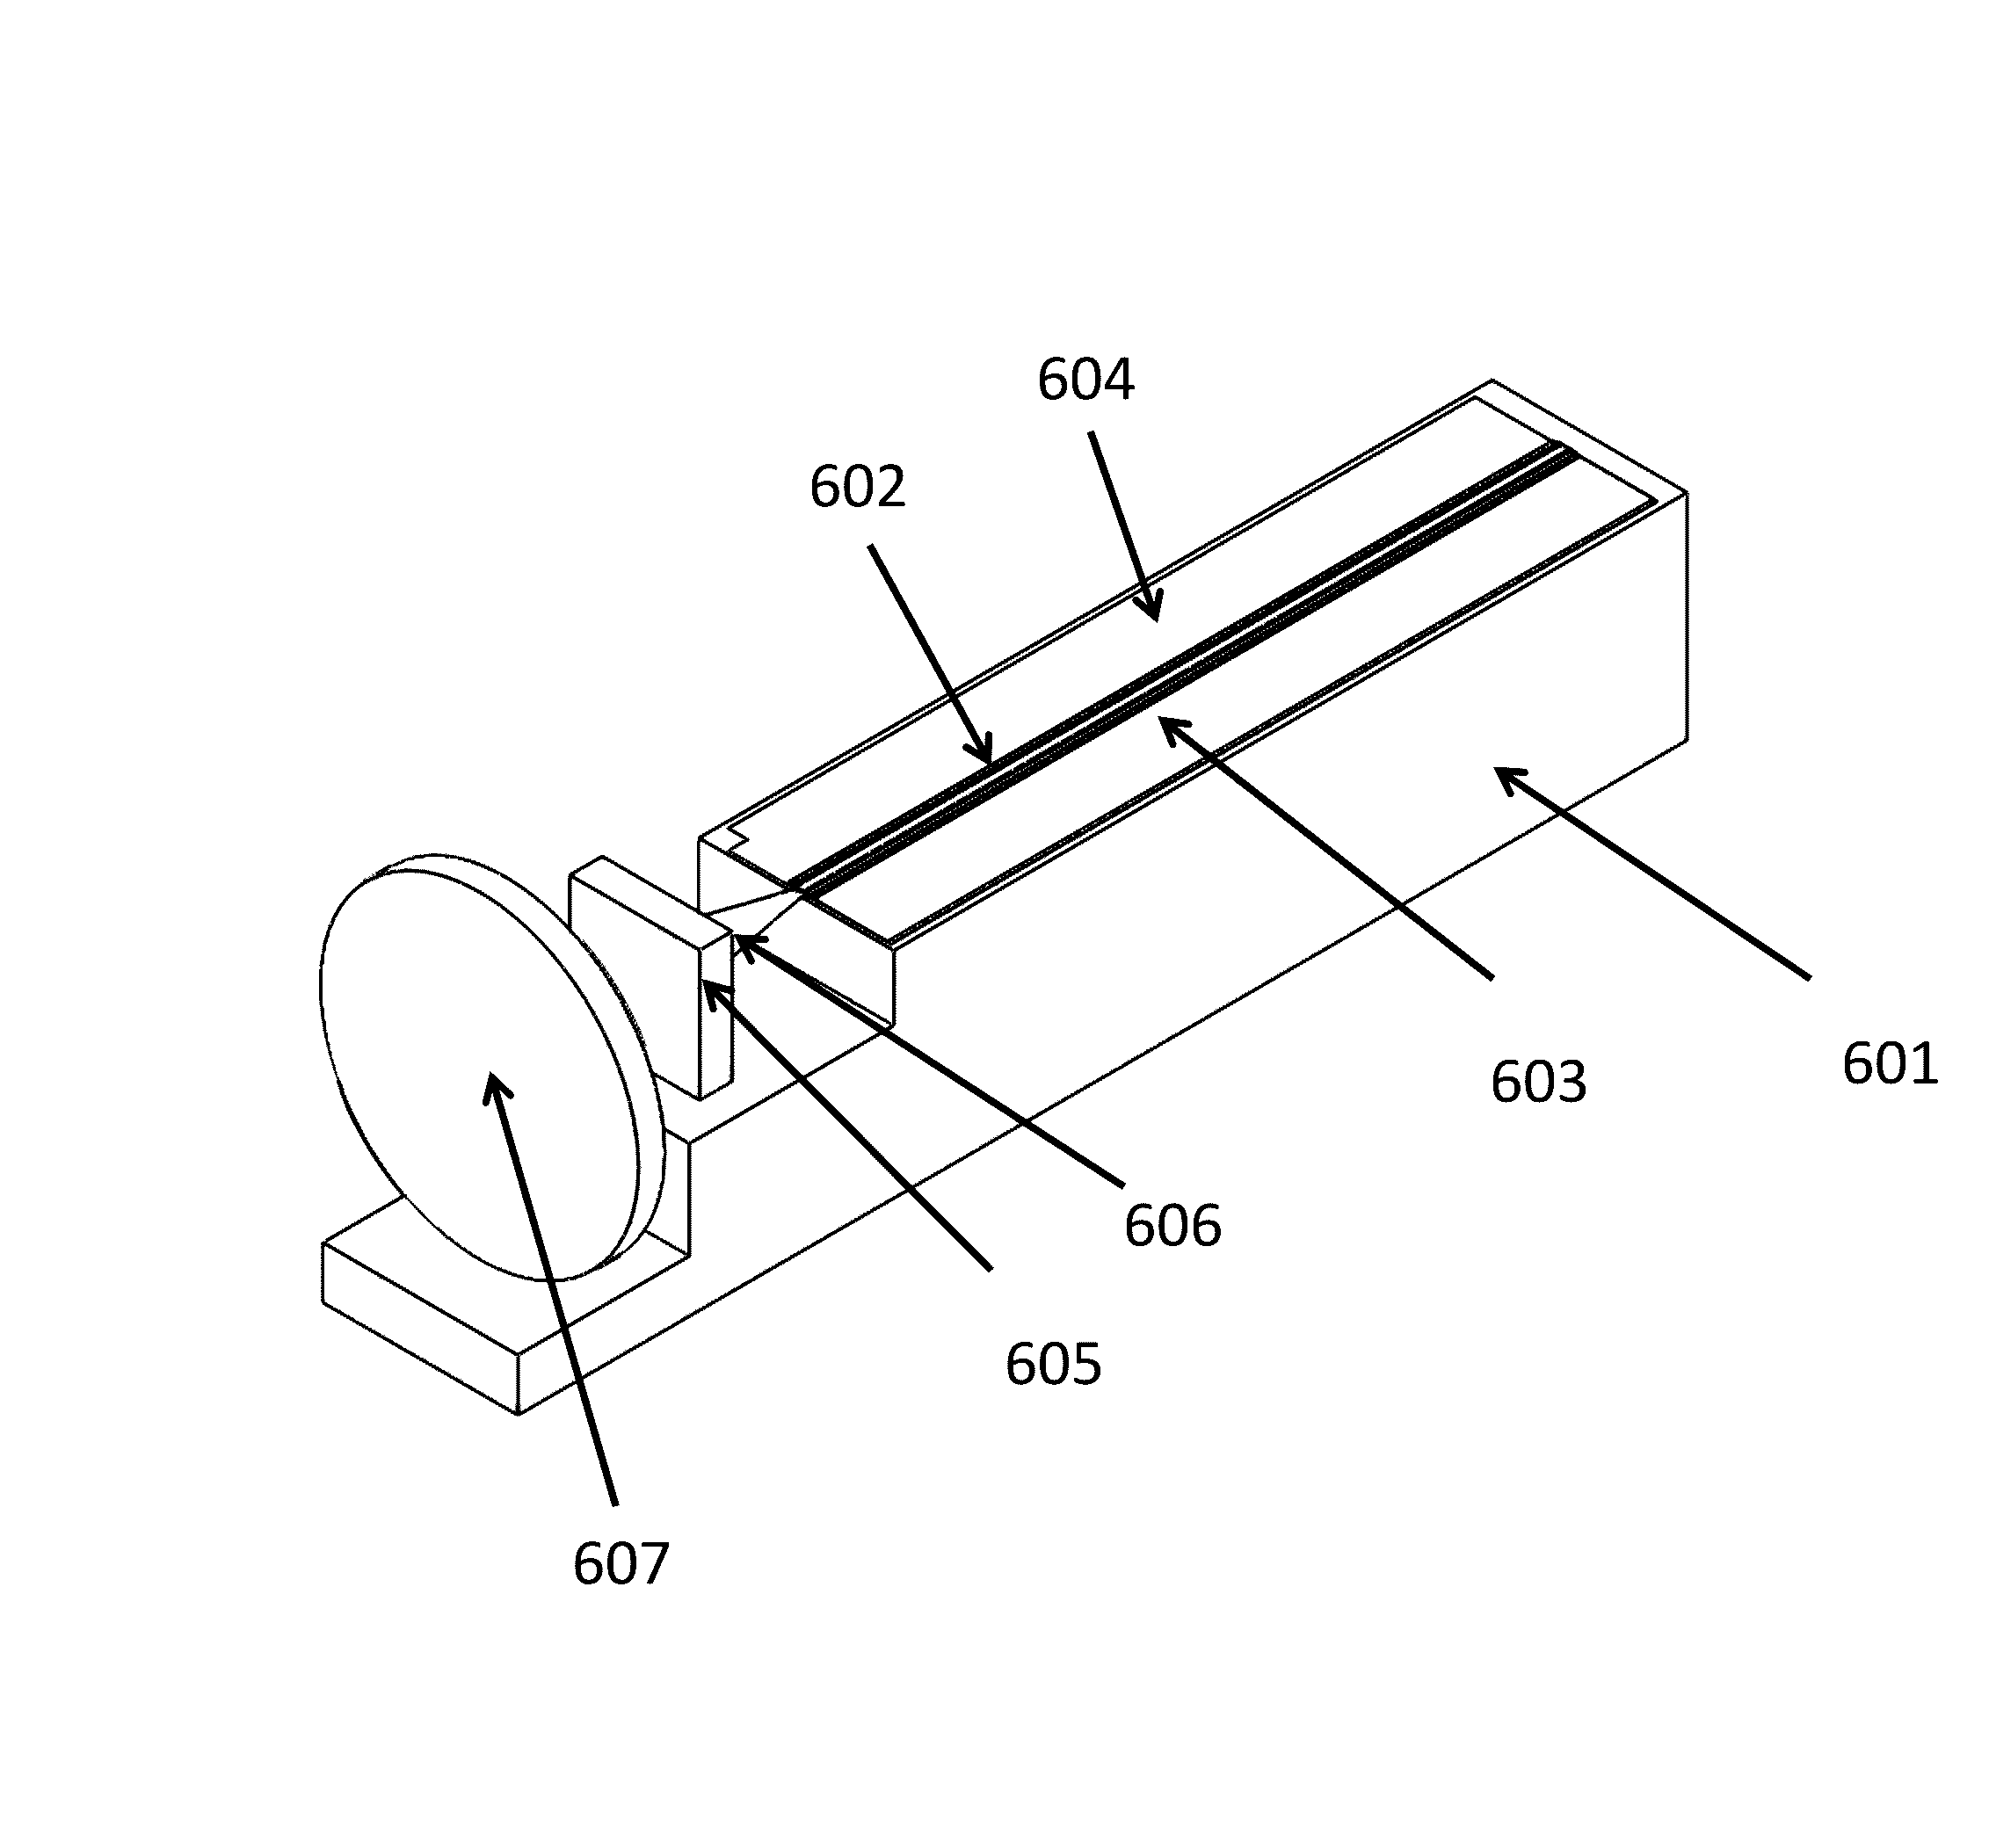 Specialized integrated light source using a laser diode